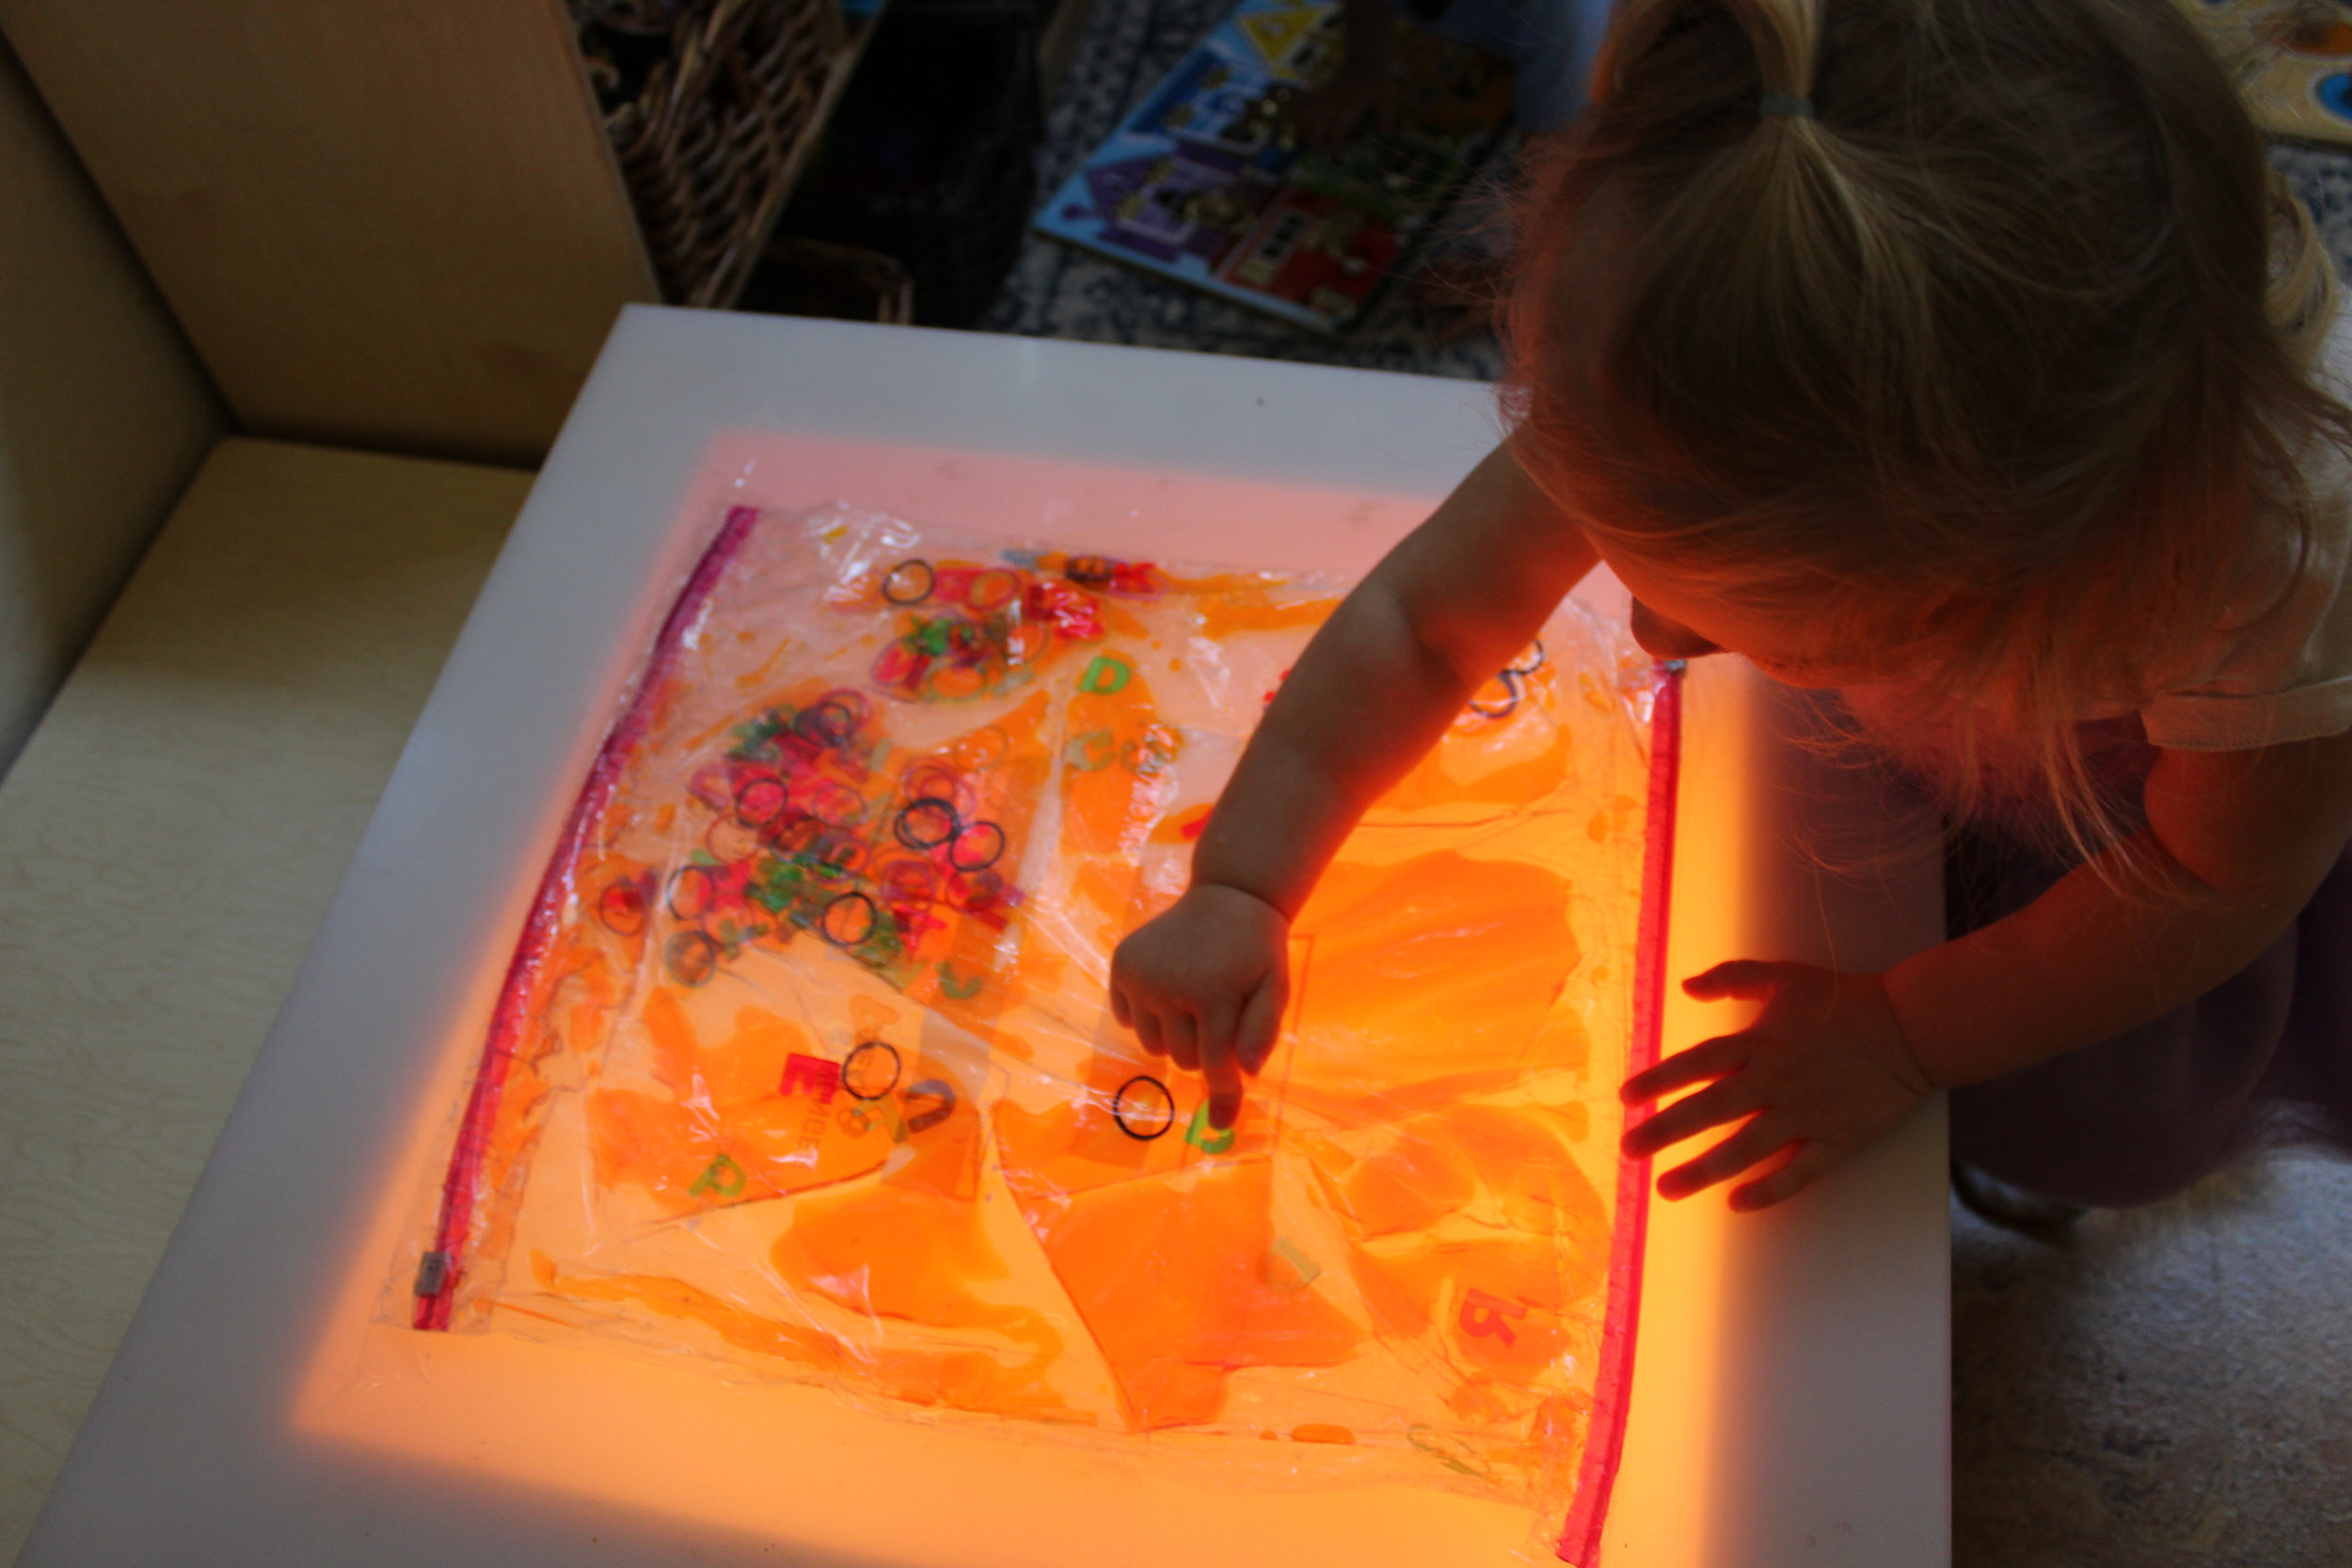  Sensory bags are inviting to toddlers.&nbsp; Sensory invitations to play is a delightful resource that encourages children to explore their sense of touch and sight.&nbsp;&nbsp;Madeline appears intrigued as she explores the sensory bag on the lighta